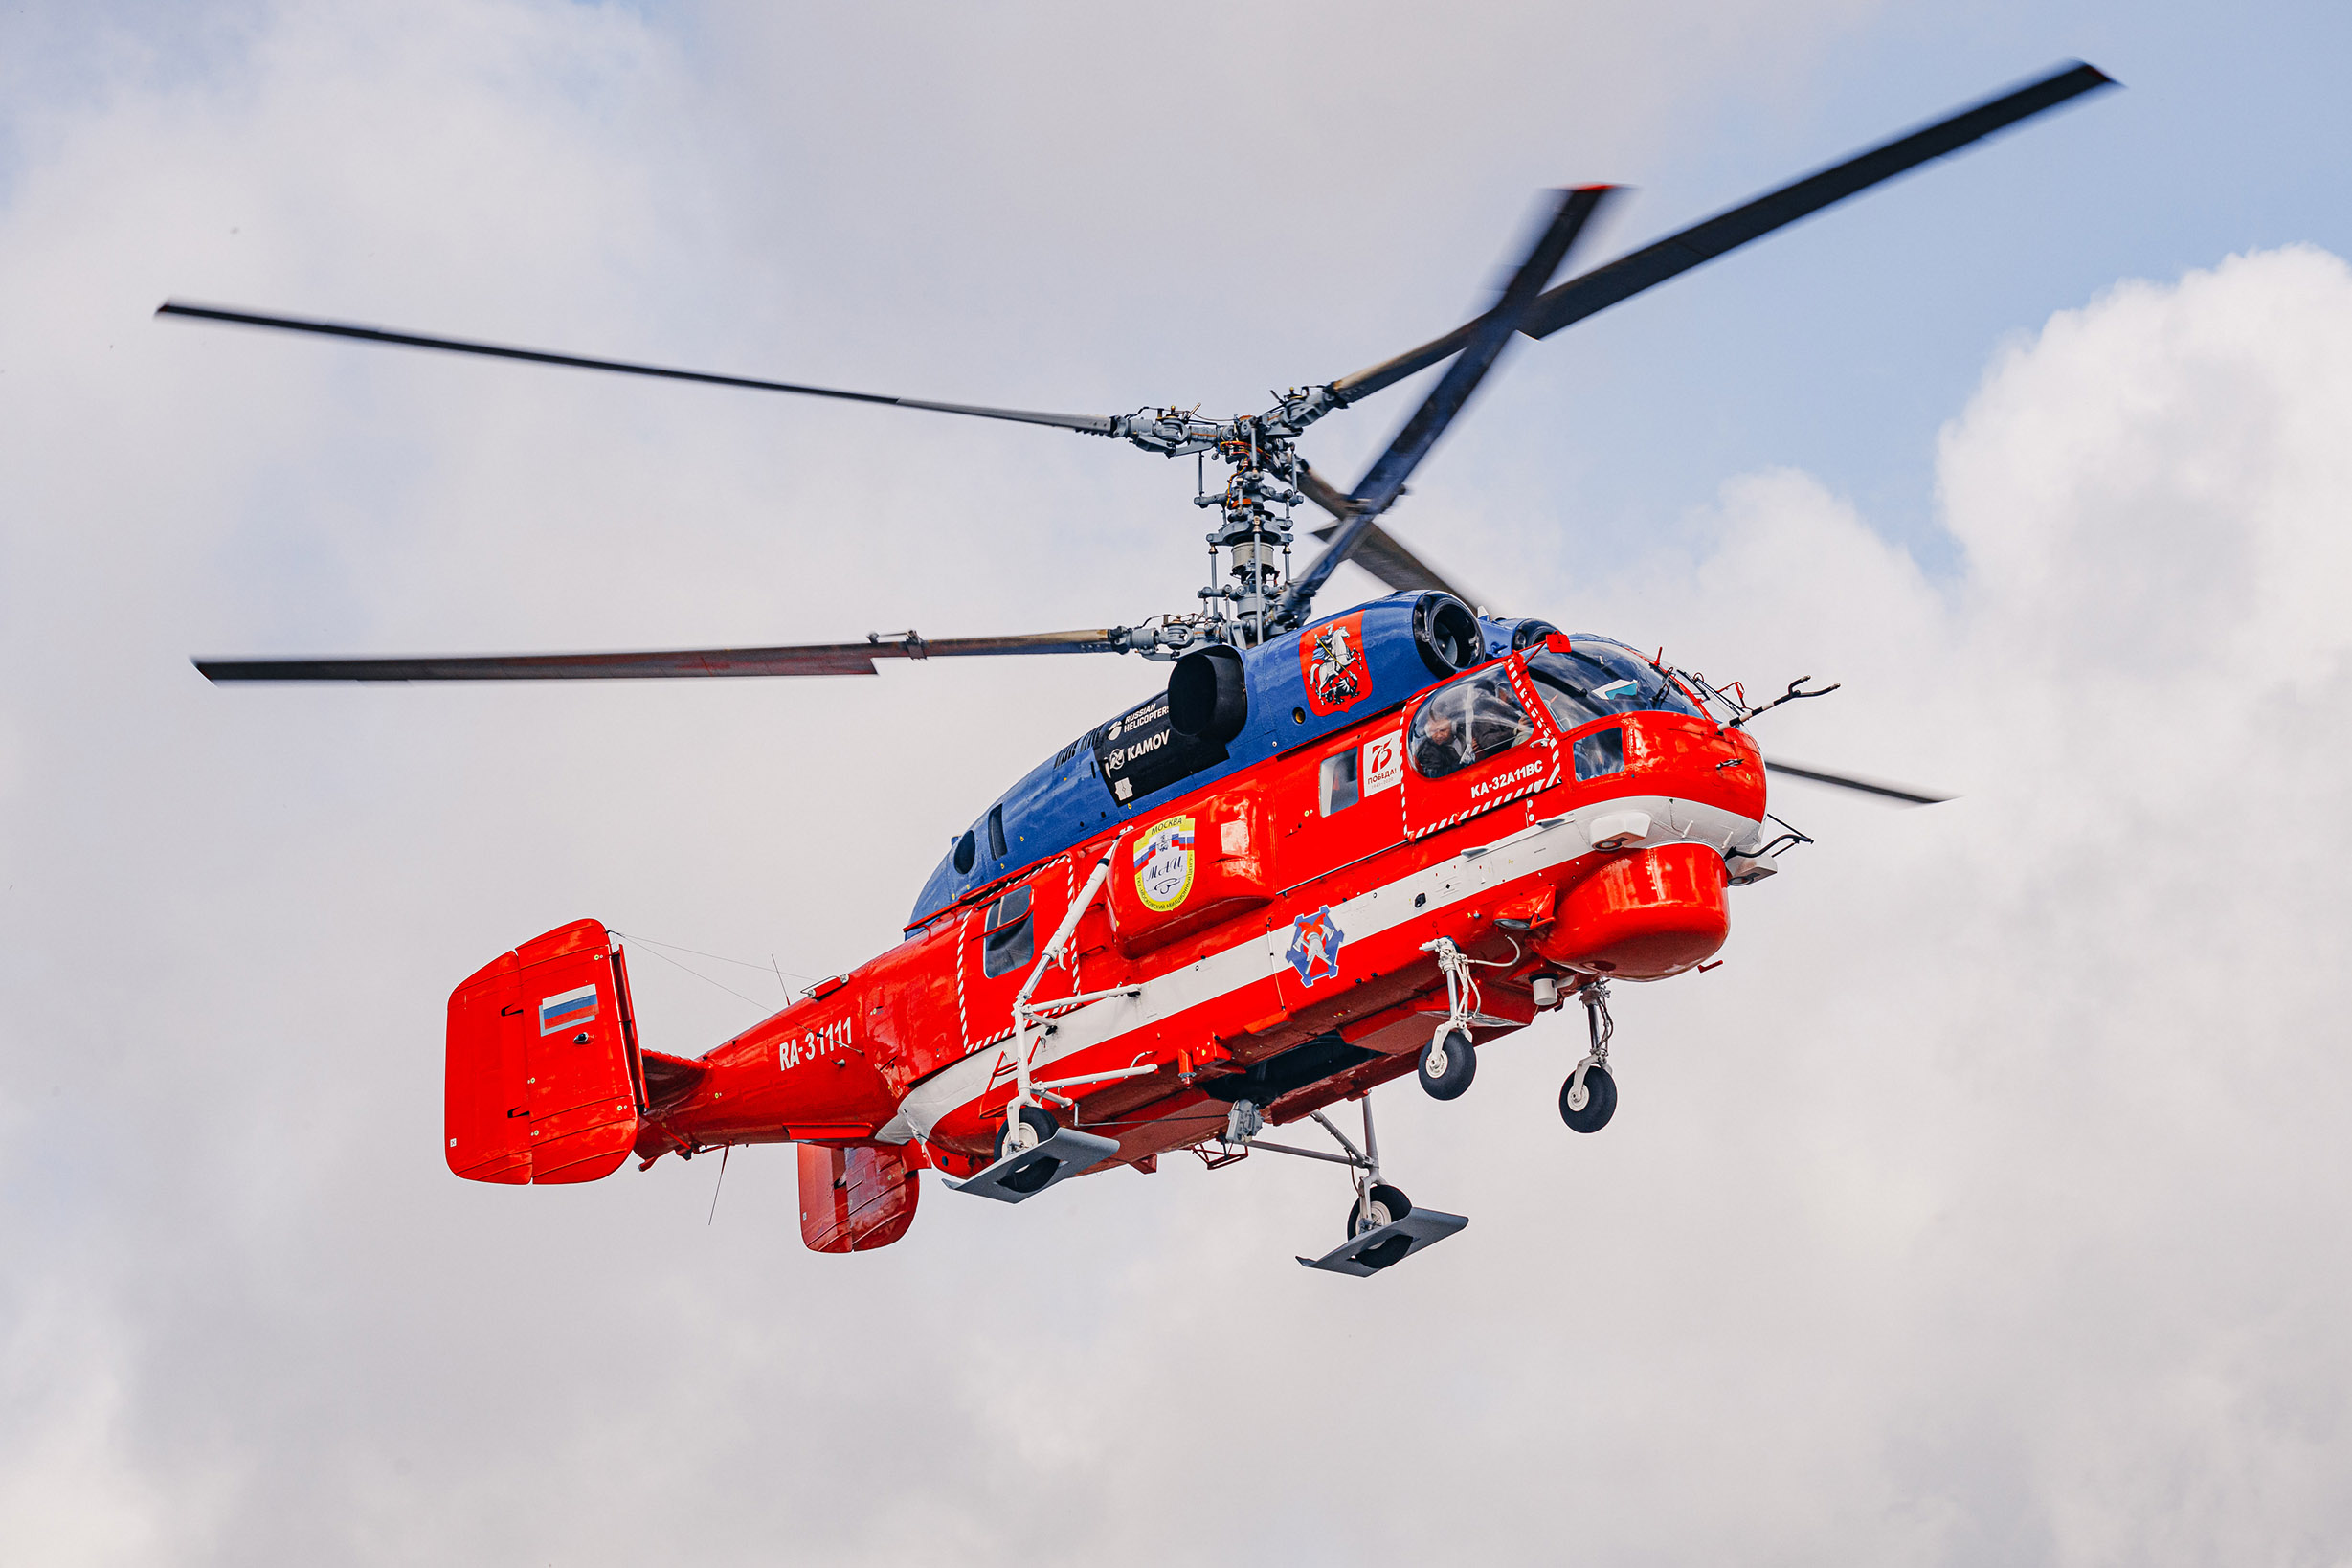 Russian Helicopters to exhibit upgraded Ka-32 firefighting helicopter at MAKS